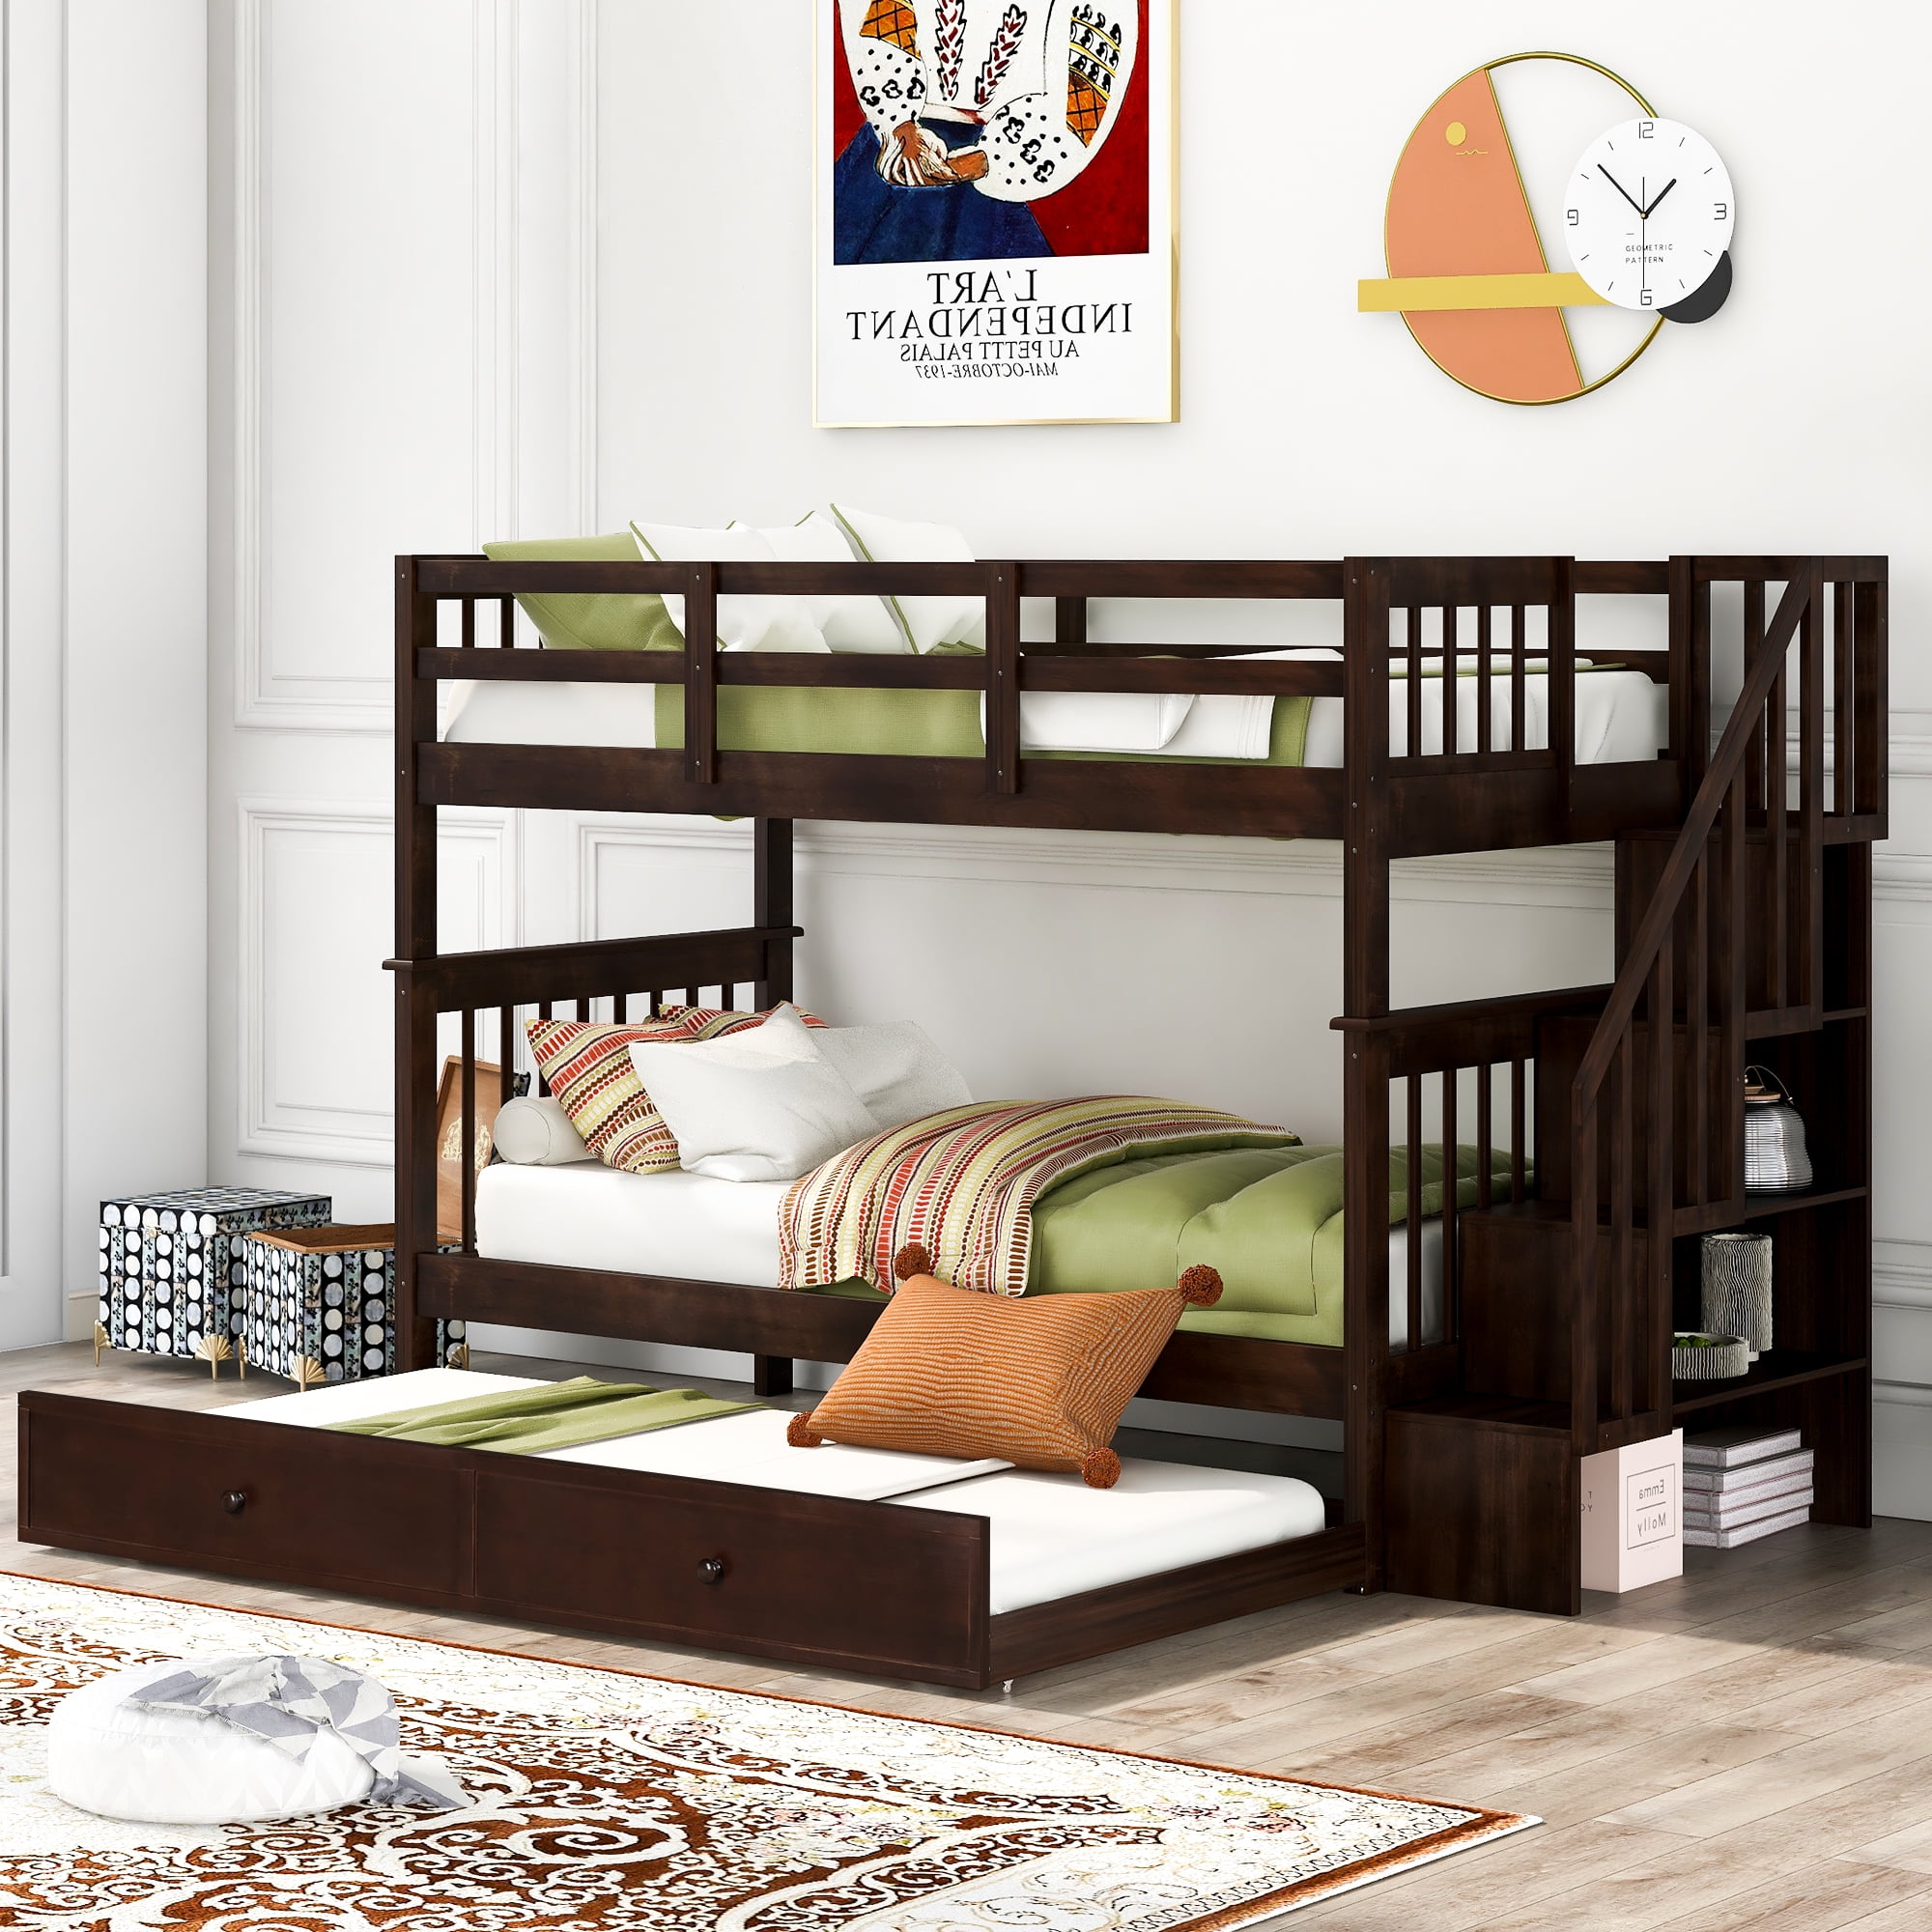 Sesslife Kids Bunk Beds For Small Rooms, Small Wooden Bunk Beds